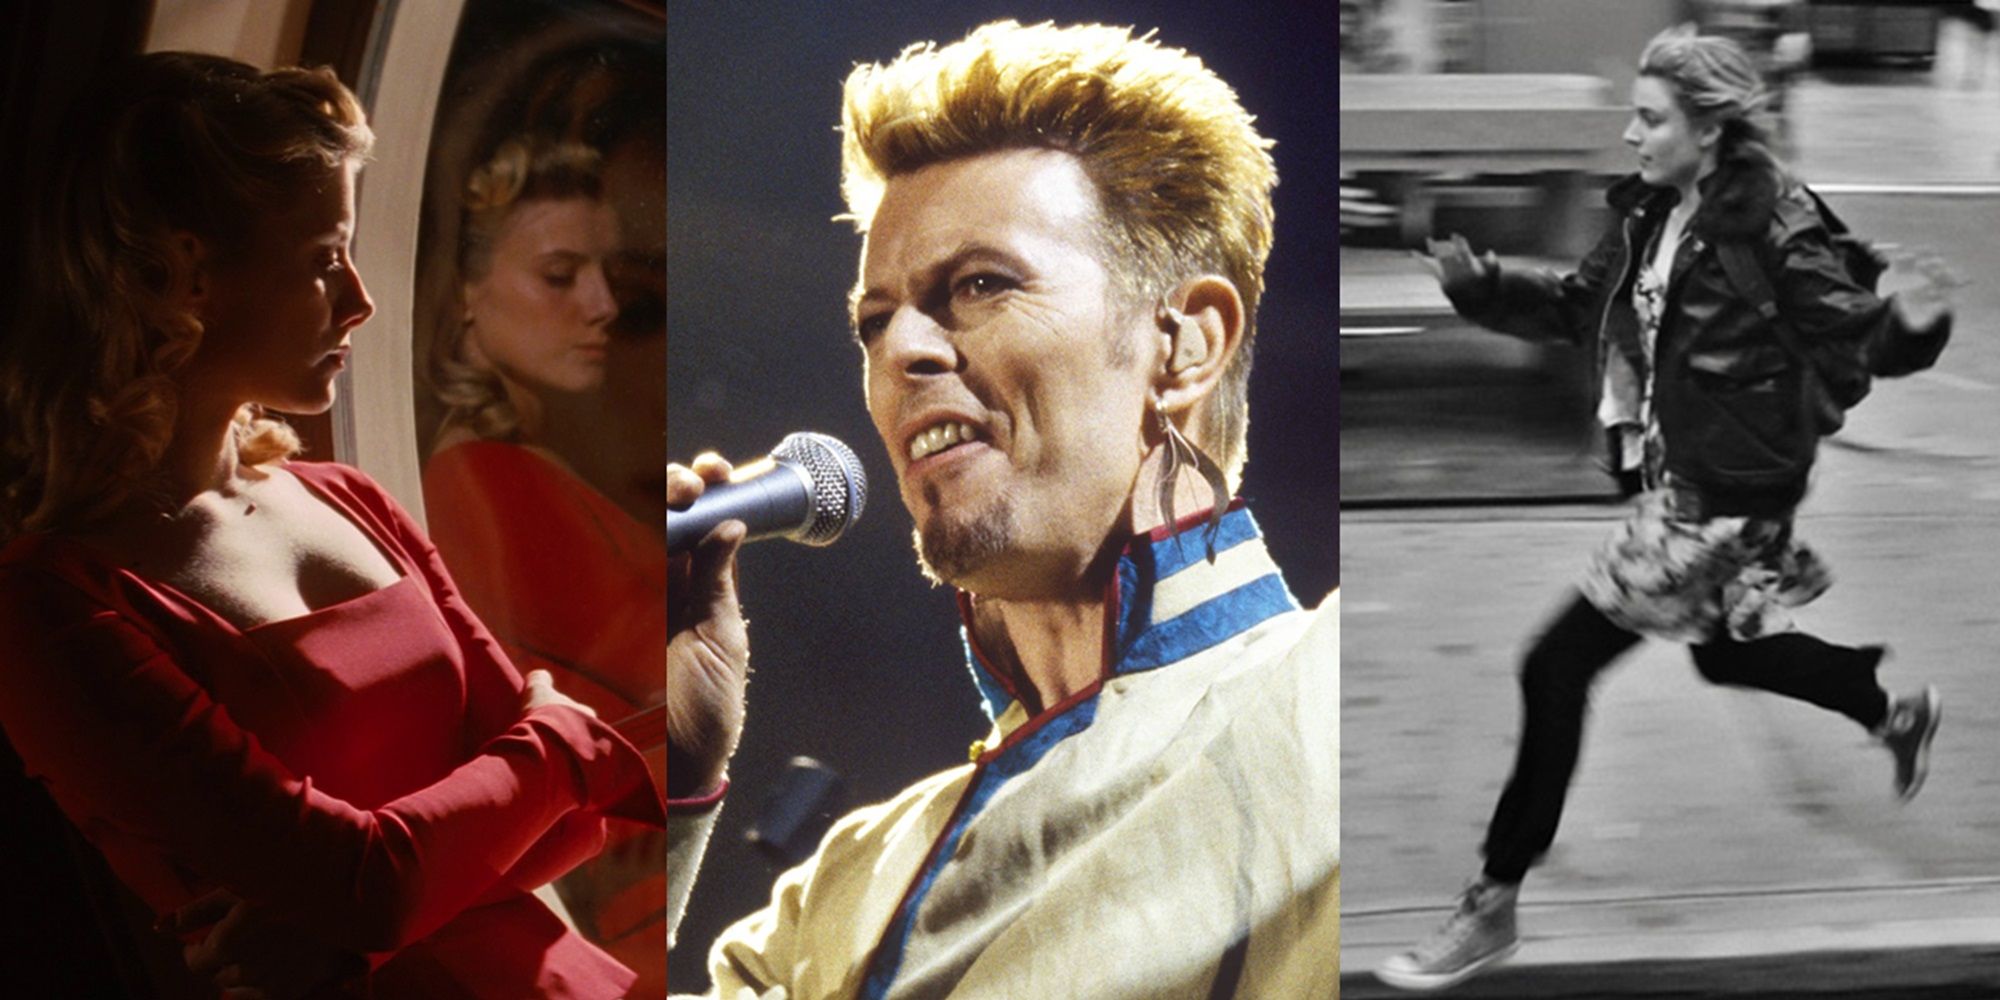 David Bowie songs in movies